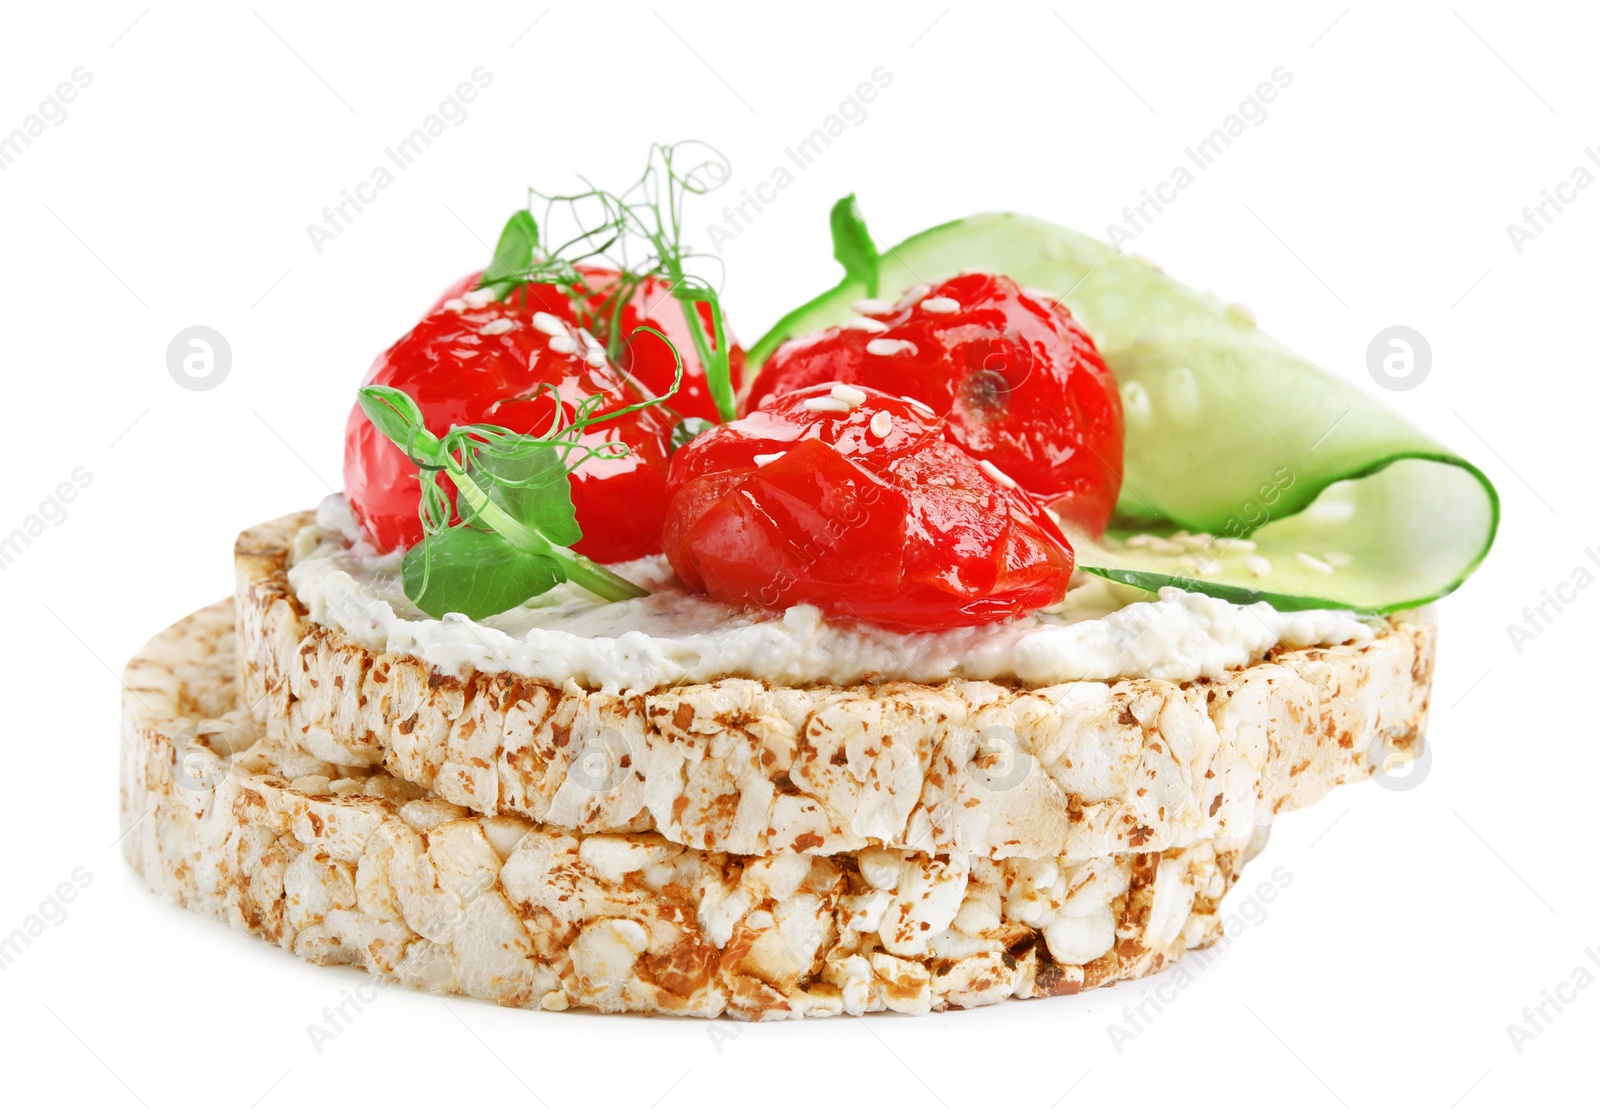 Photo of Crunchy buckwheat cakes with cream cheese, tomatoes and cucumber slice isolated on white